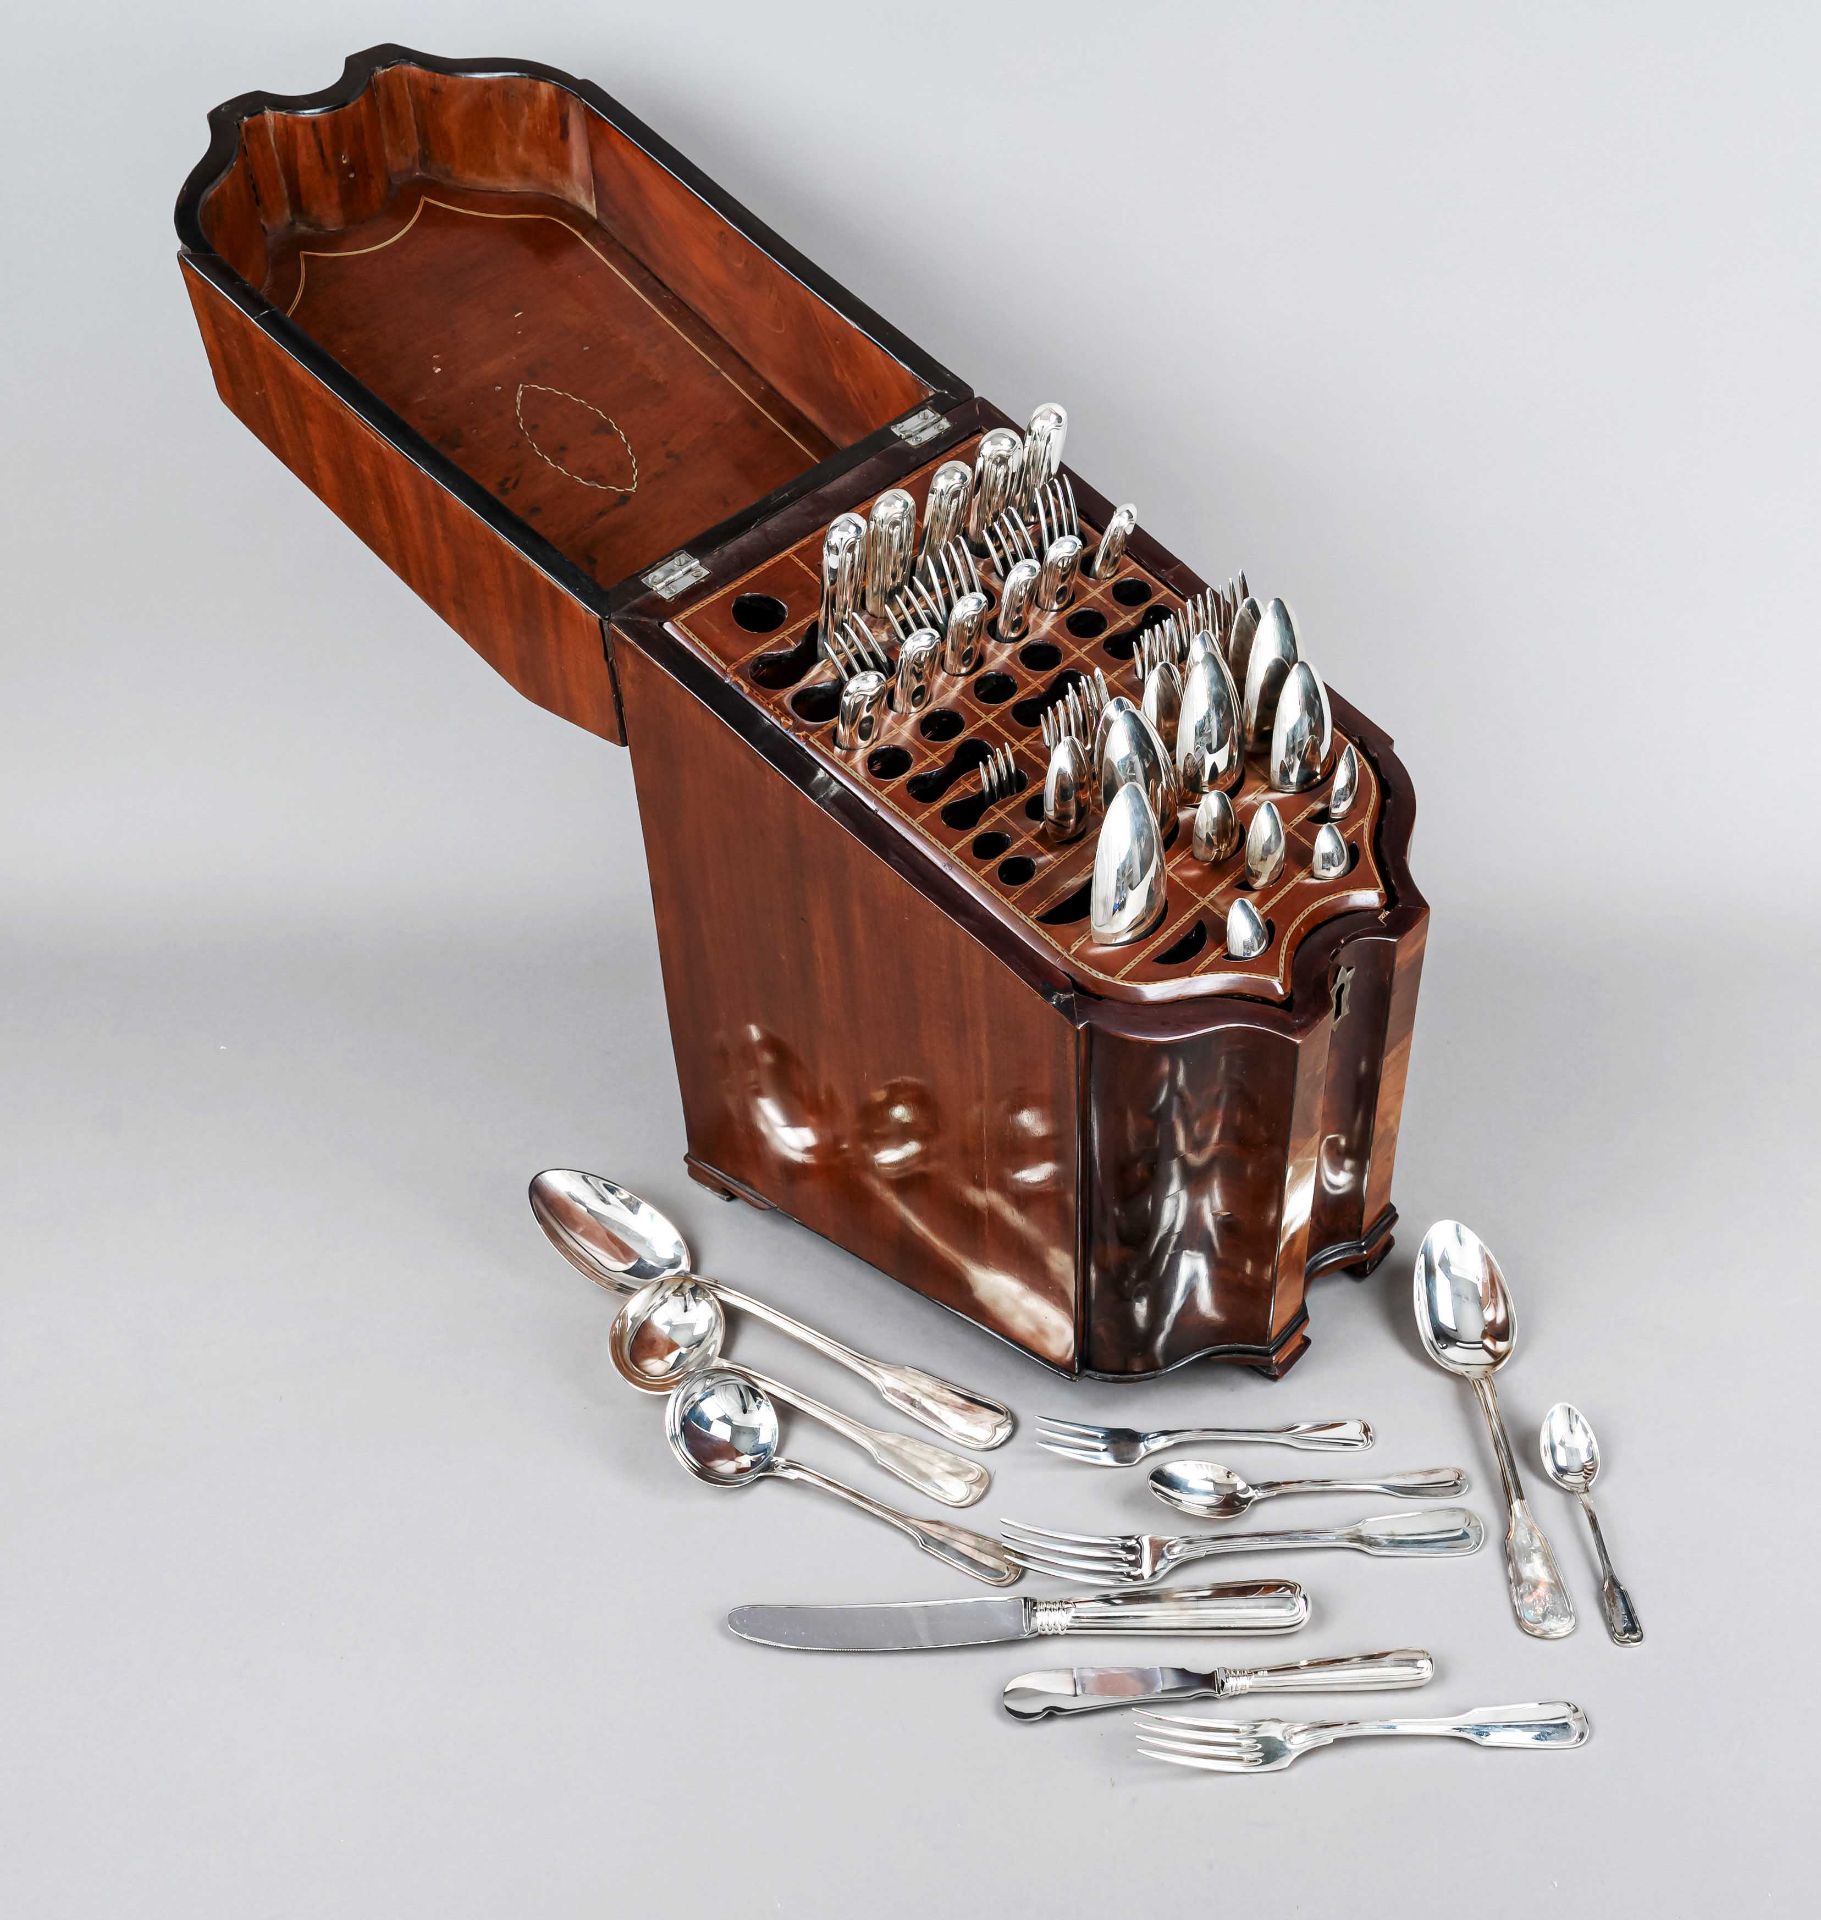 Cutlery box, England, early 19th c., mahogany veneer, on 4 feet, matching curved front, beveled